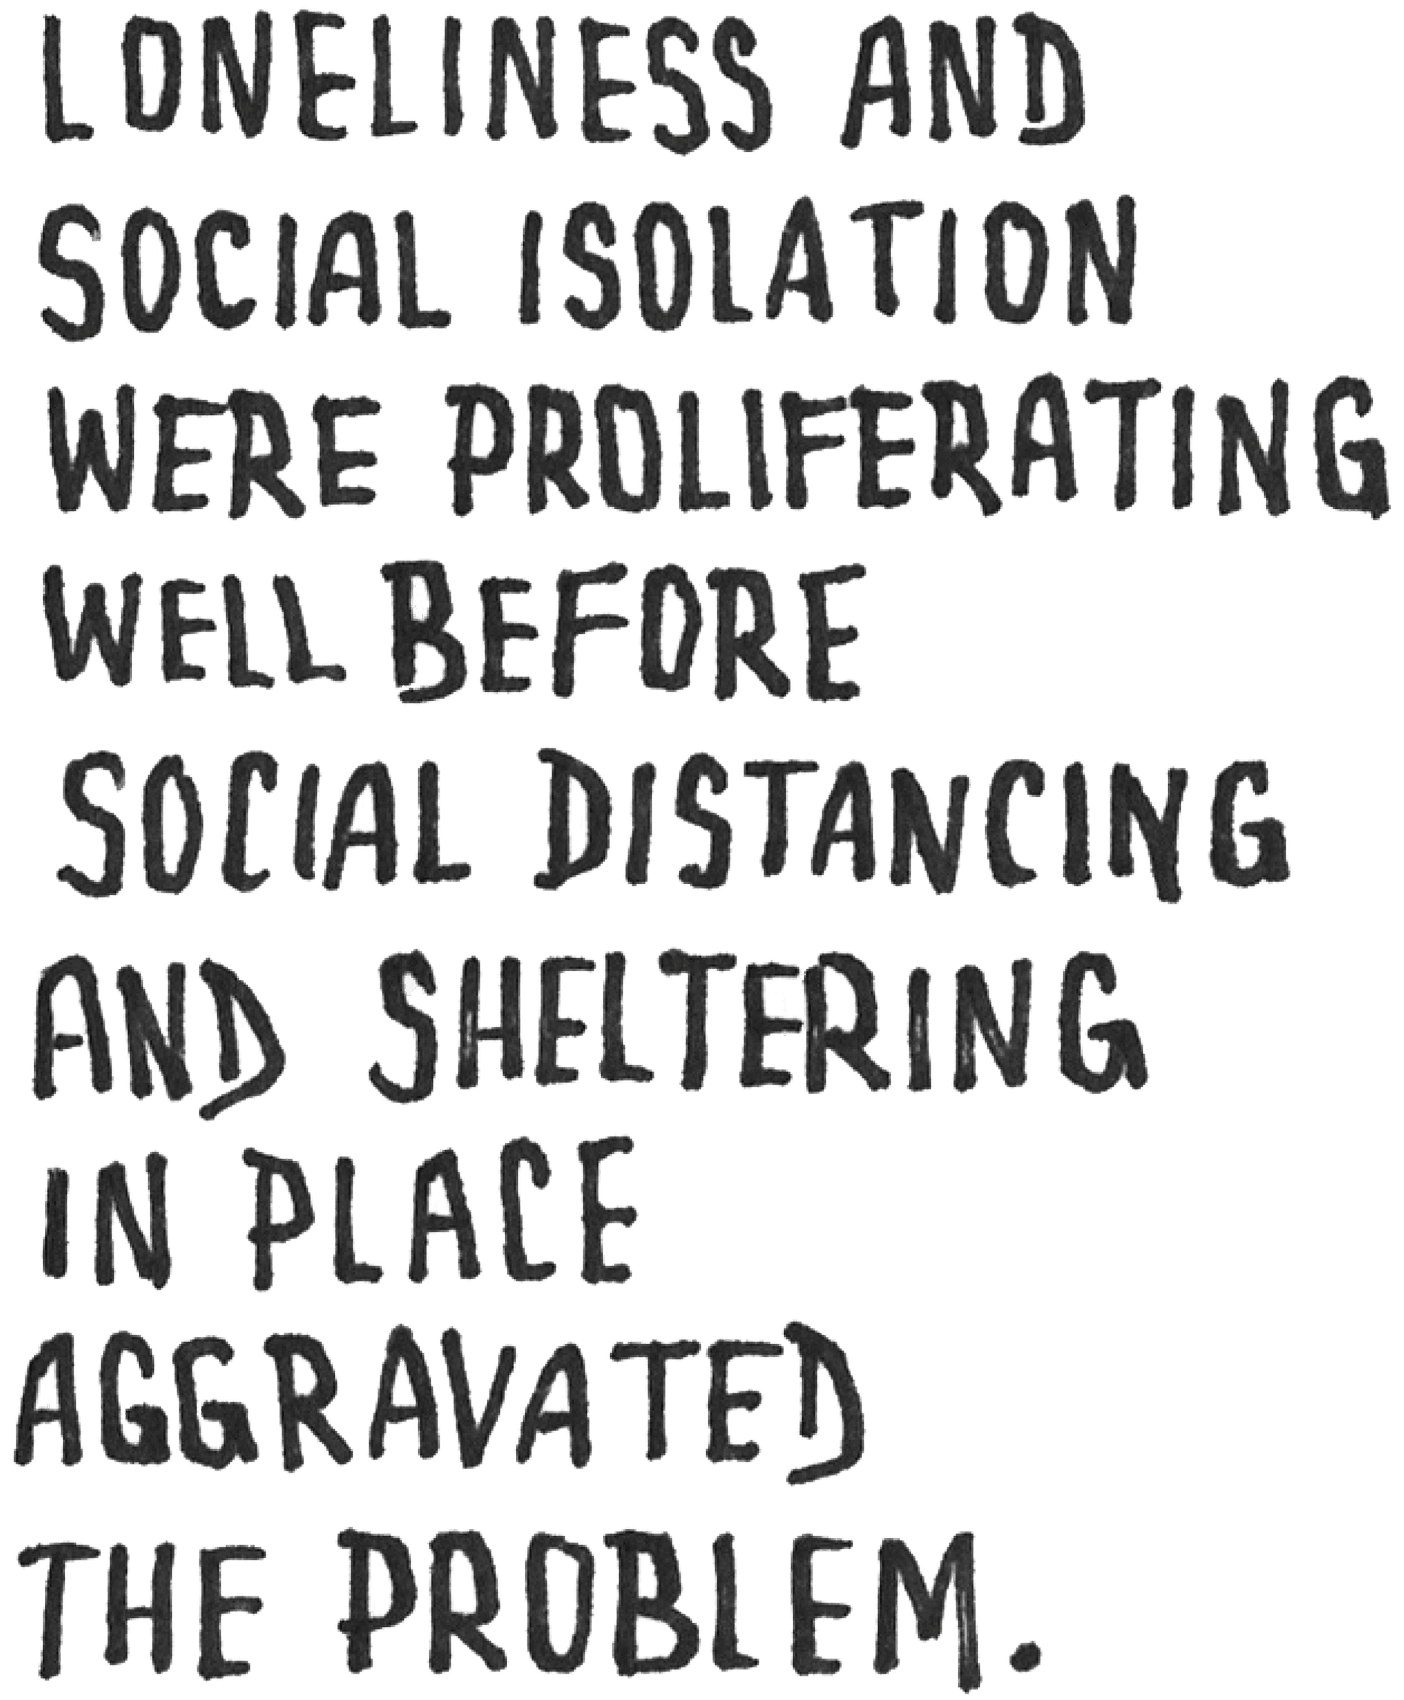 A hand letter quote reads, "Loneliness and social isolation were proliferating well before social distancing and sheltering in place aggravated the problem."